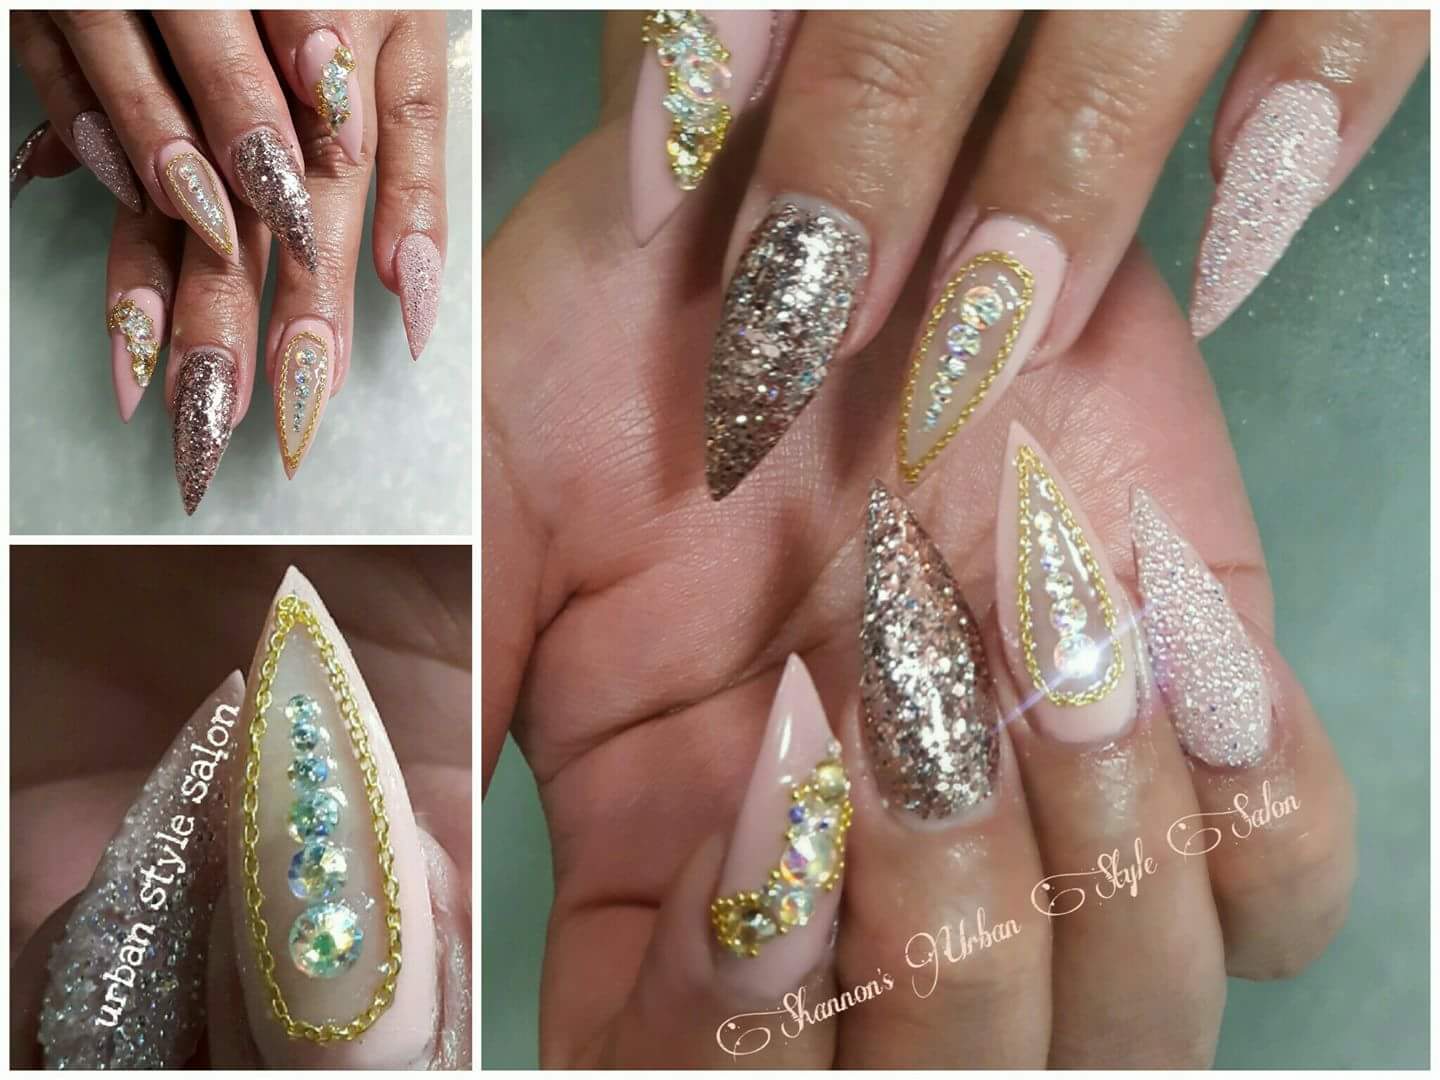 Nails Gallery | Shannons Urban Style Salon